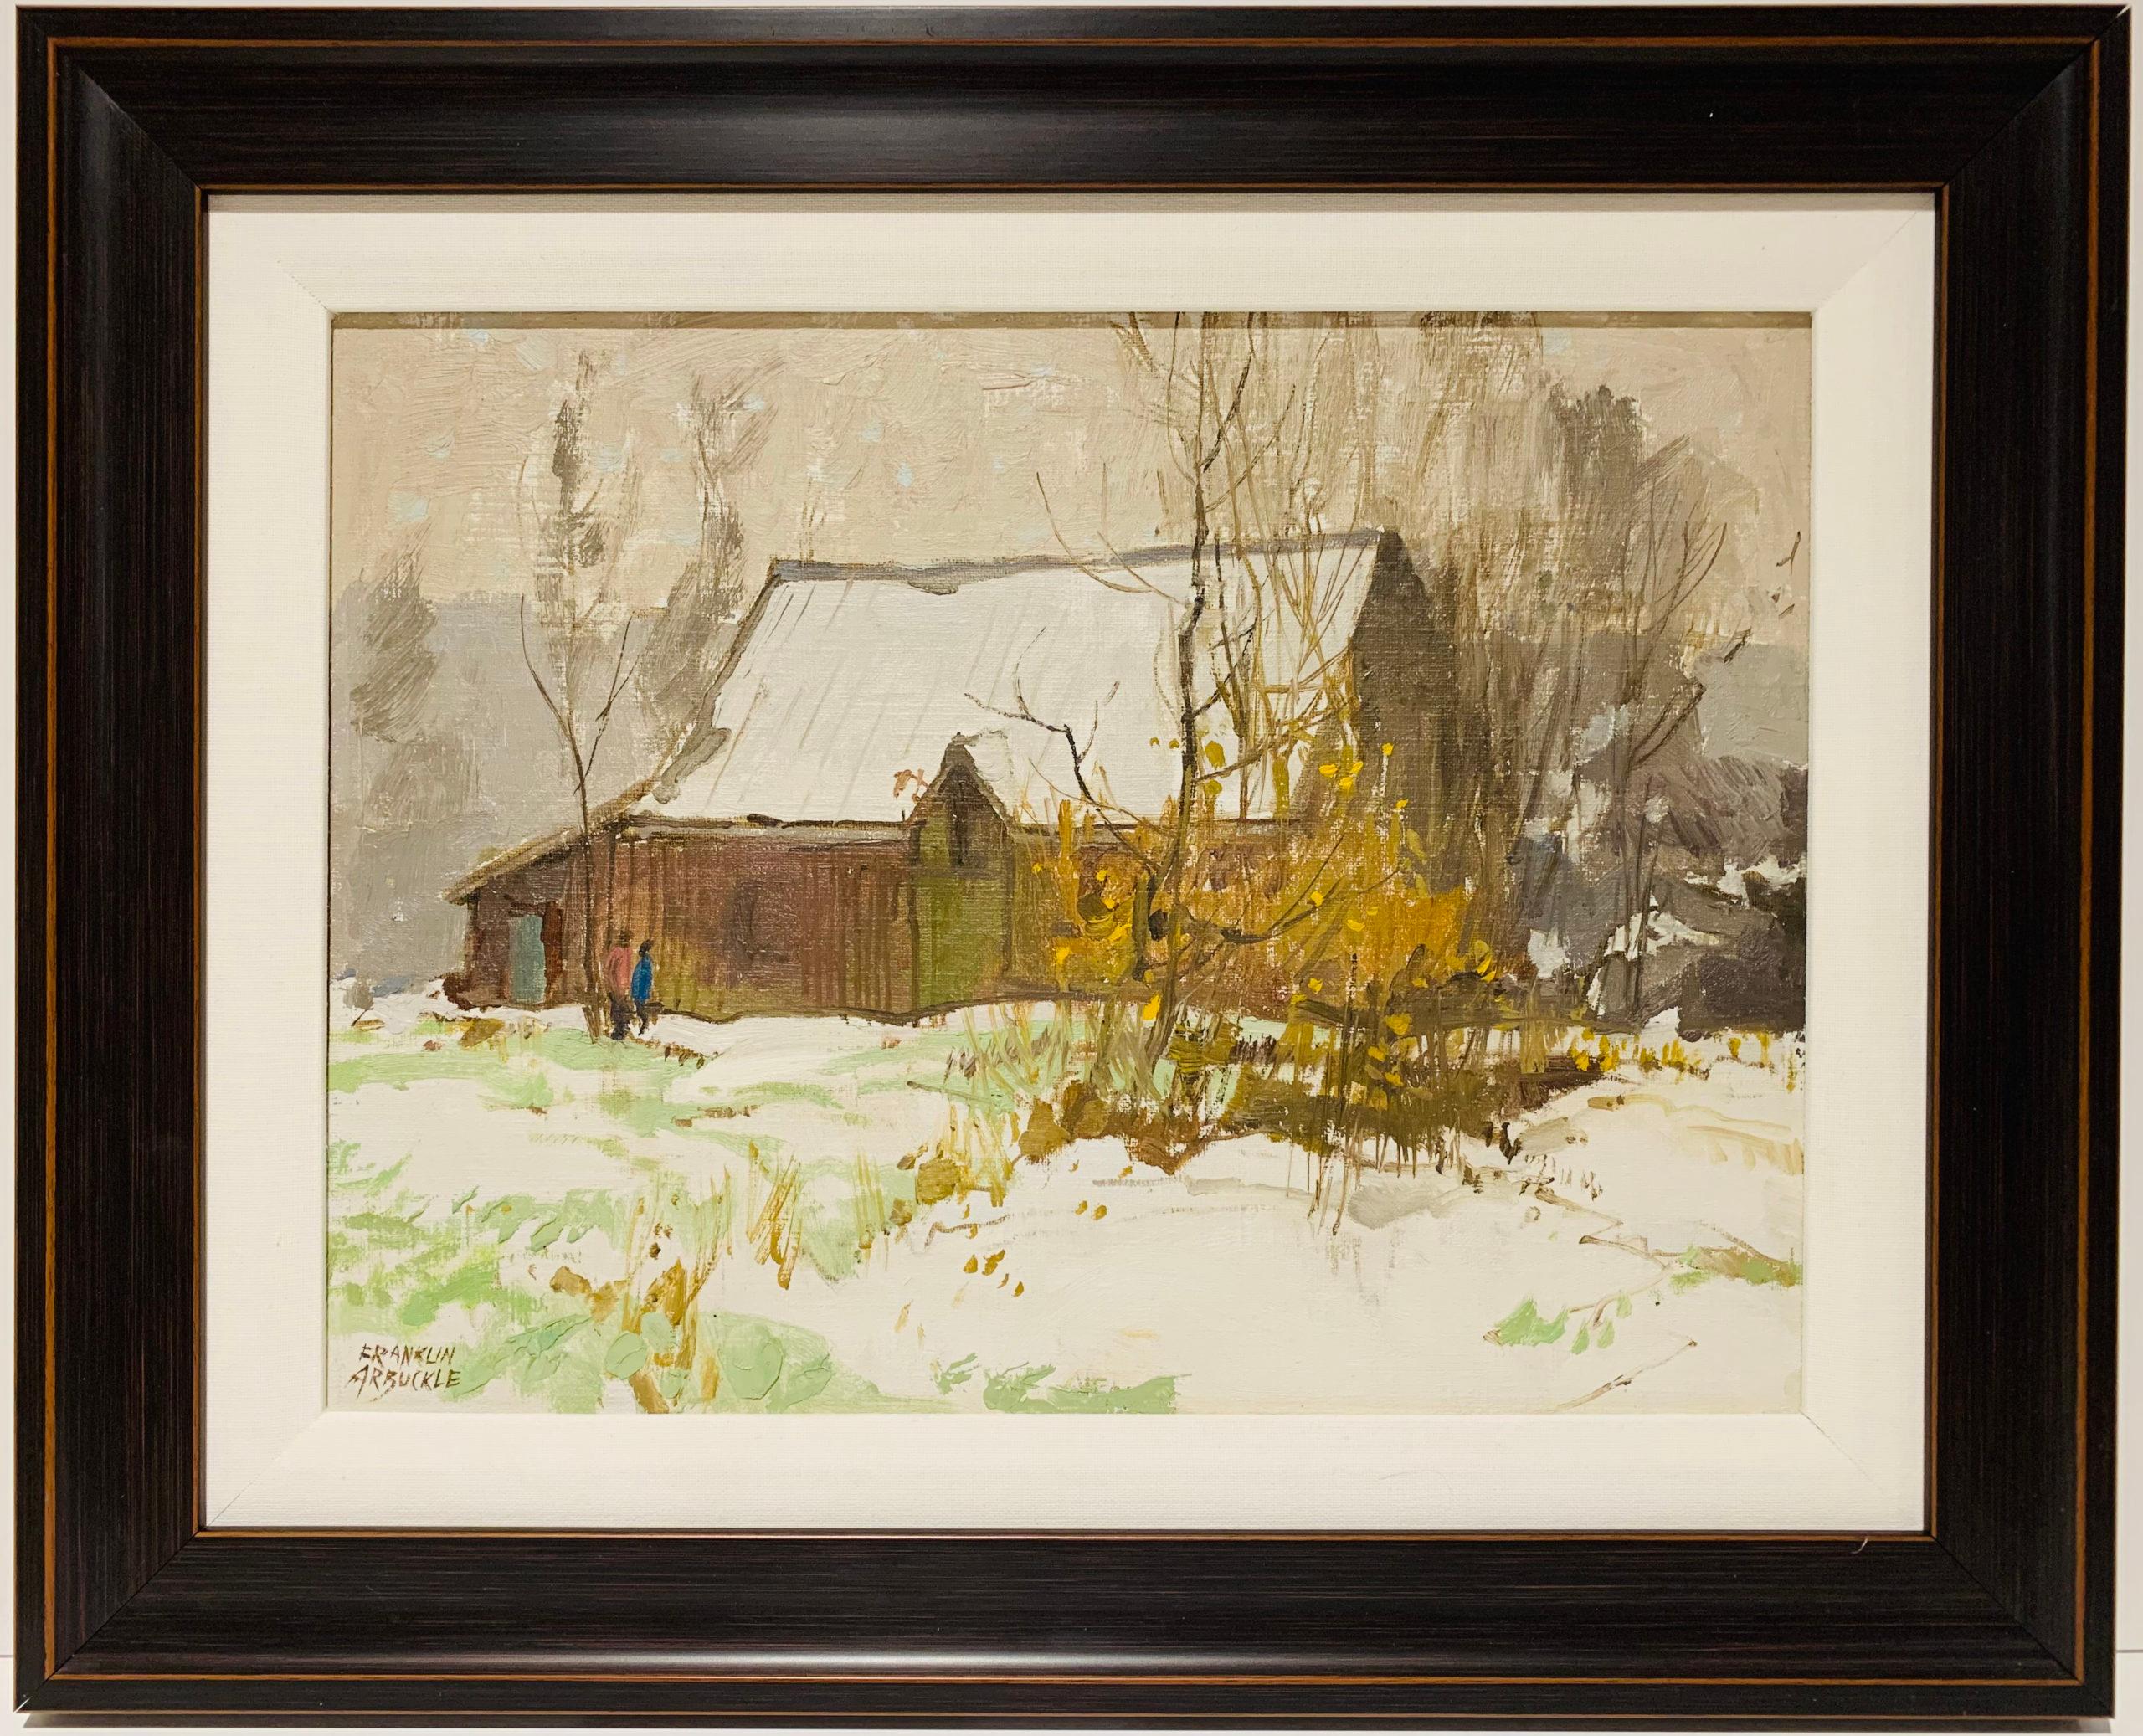 Barn in winter - Painting by George Franklin Arbuckle